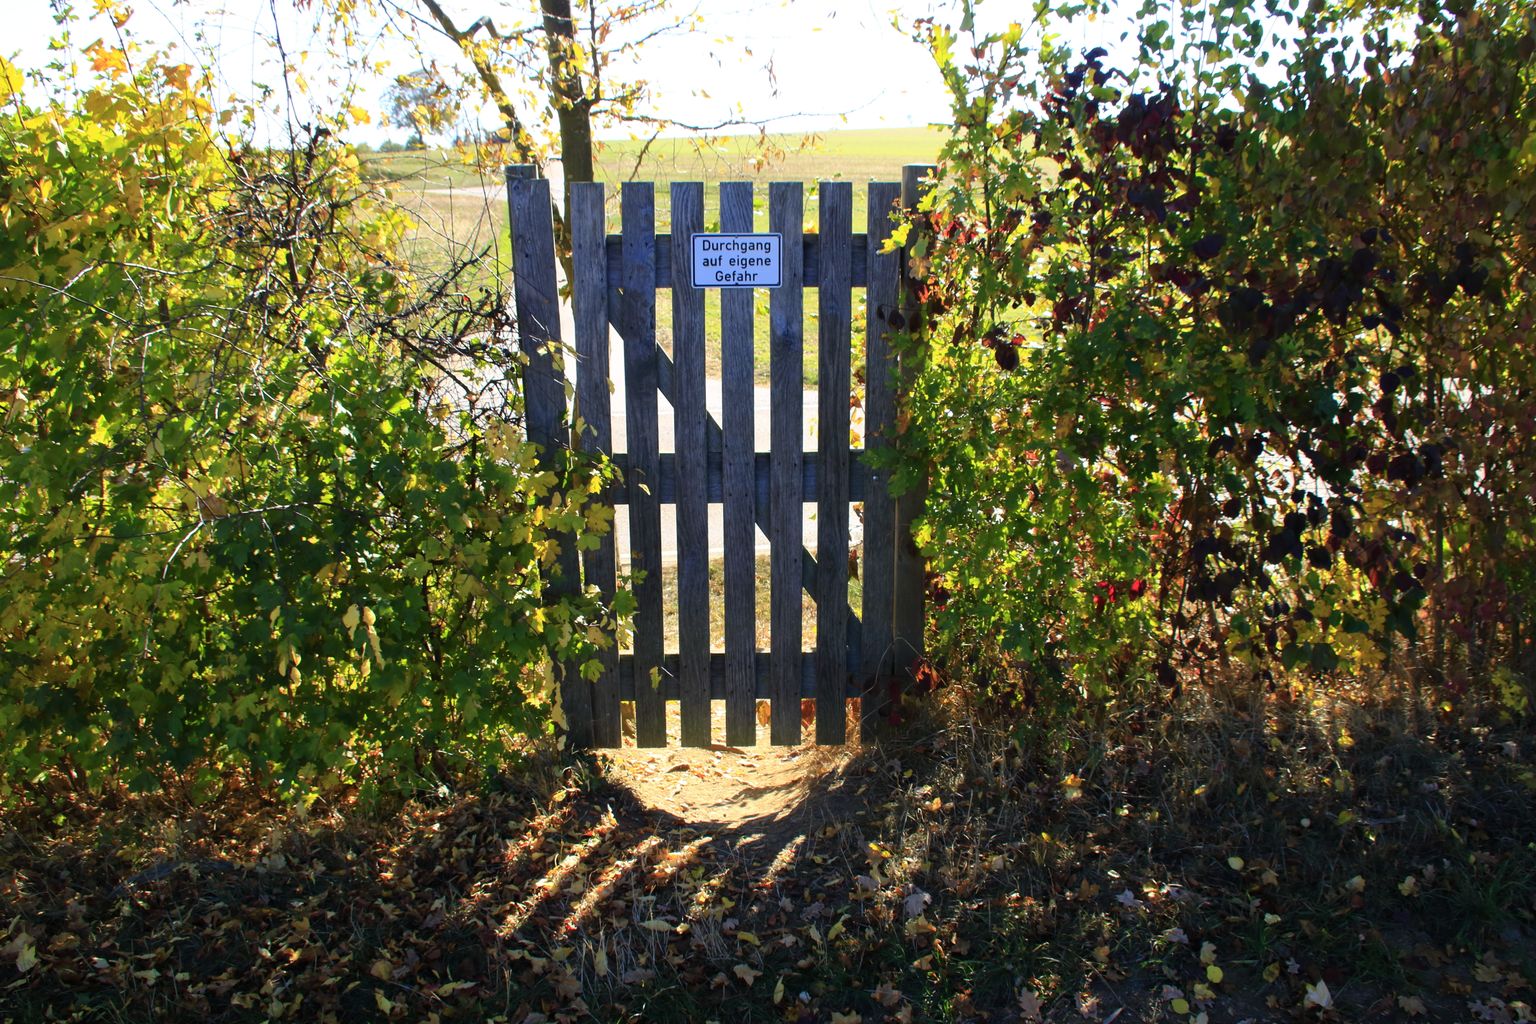 Wooden door in a hedge with the sign passage at your own risk